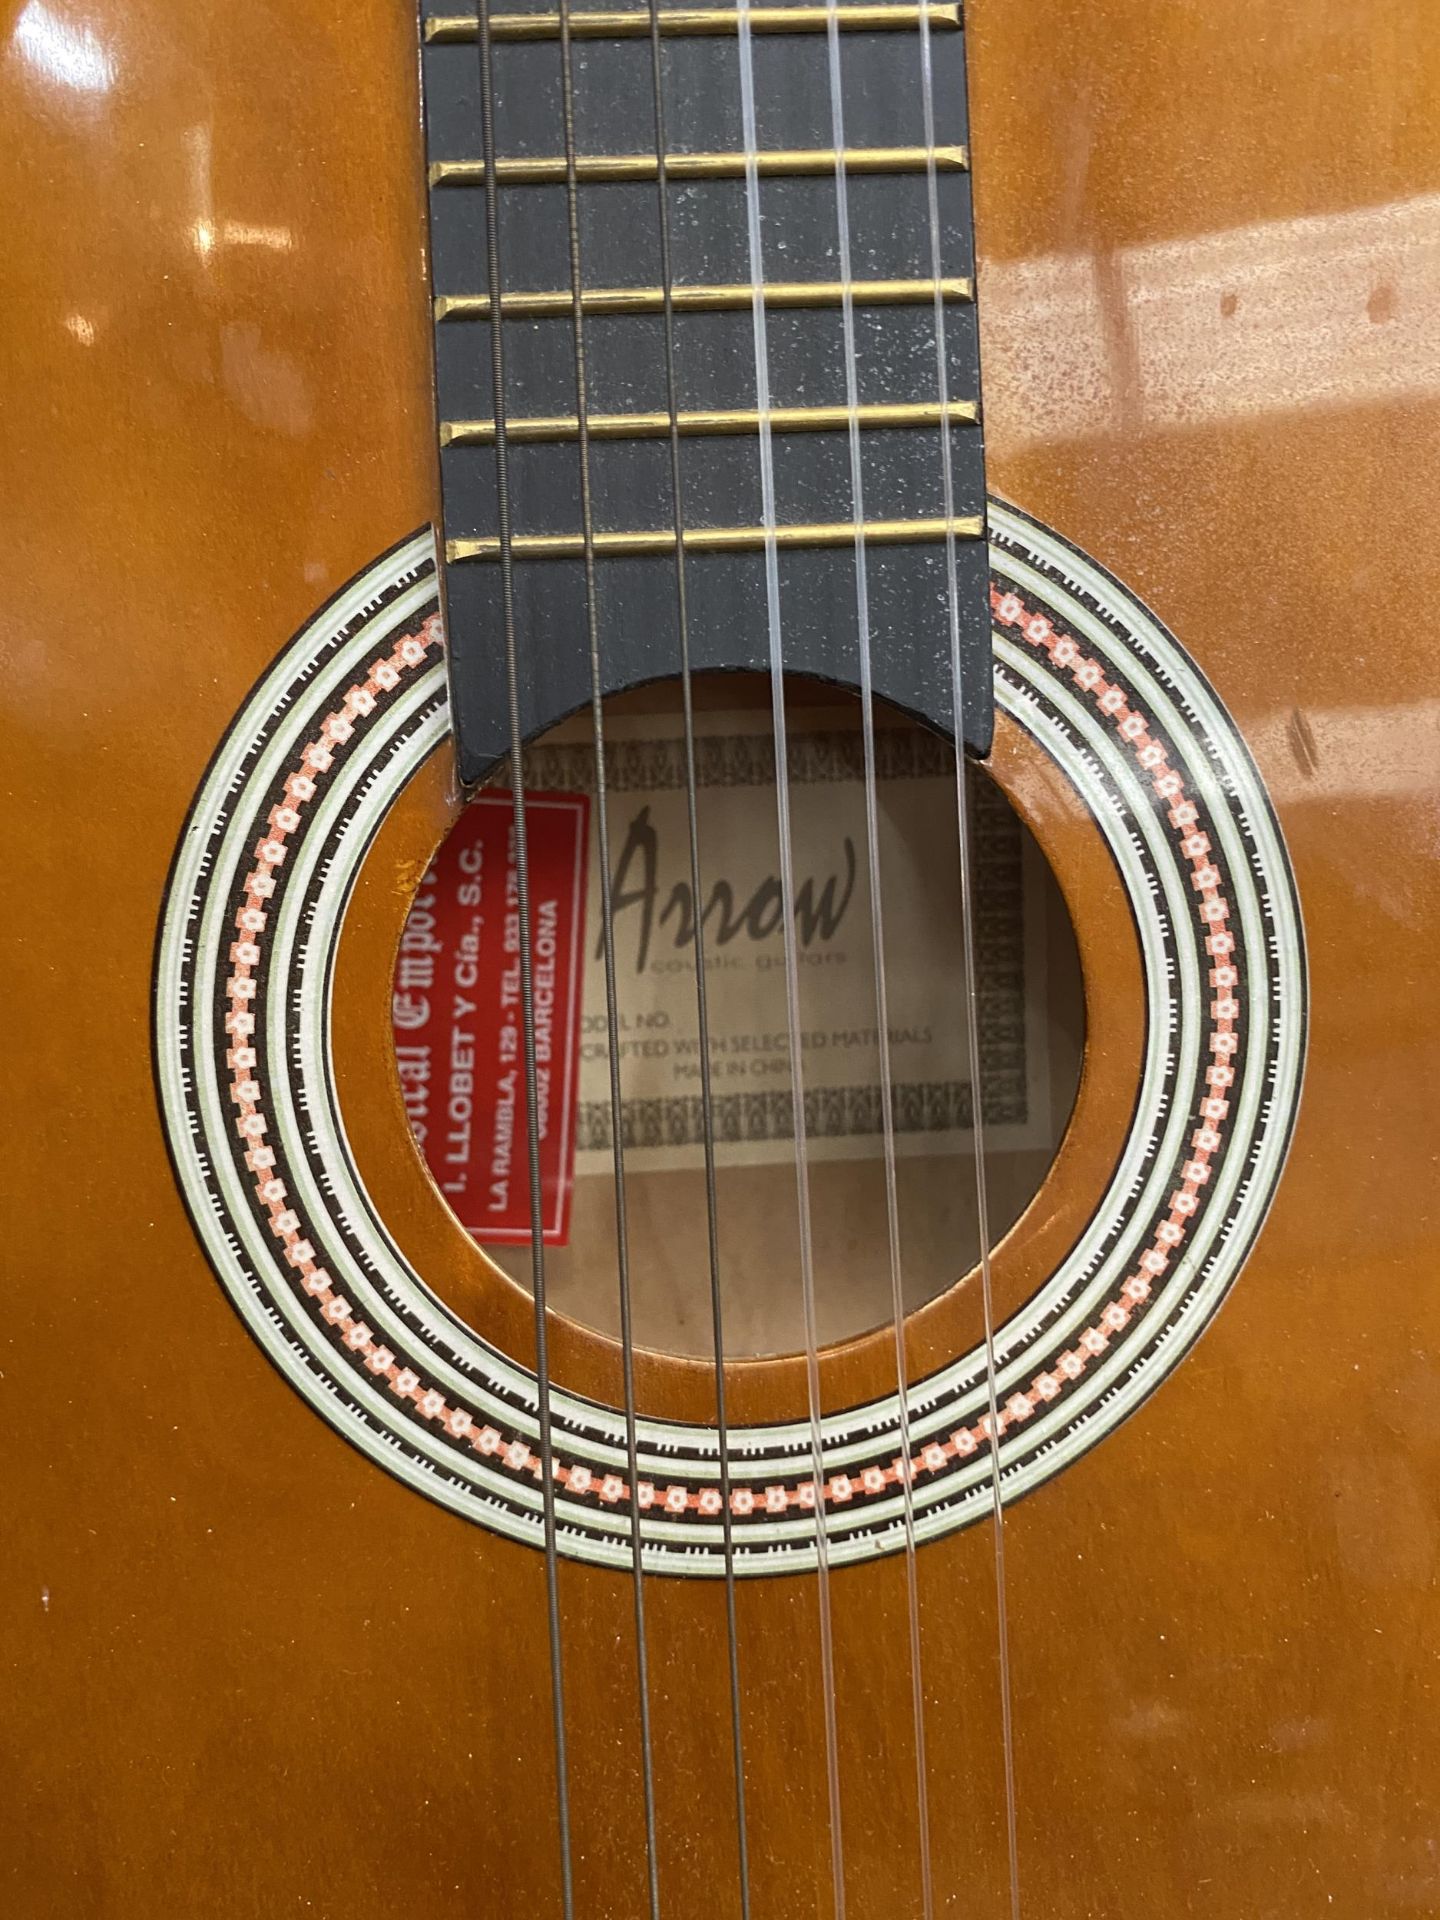 A VINTAGE WOODEN ACOUSTIC GUITAR - Image 2 of 2